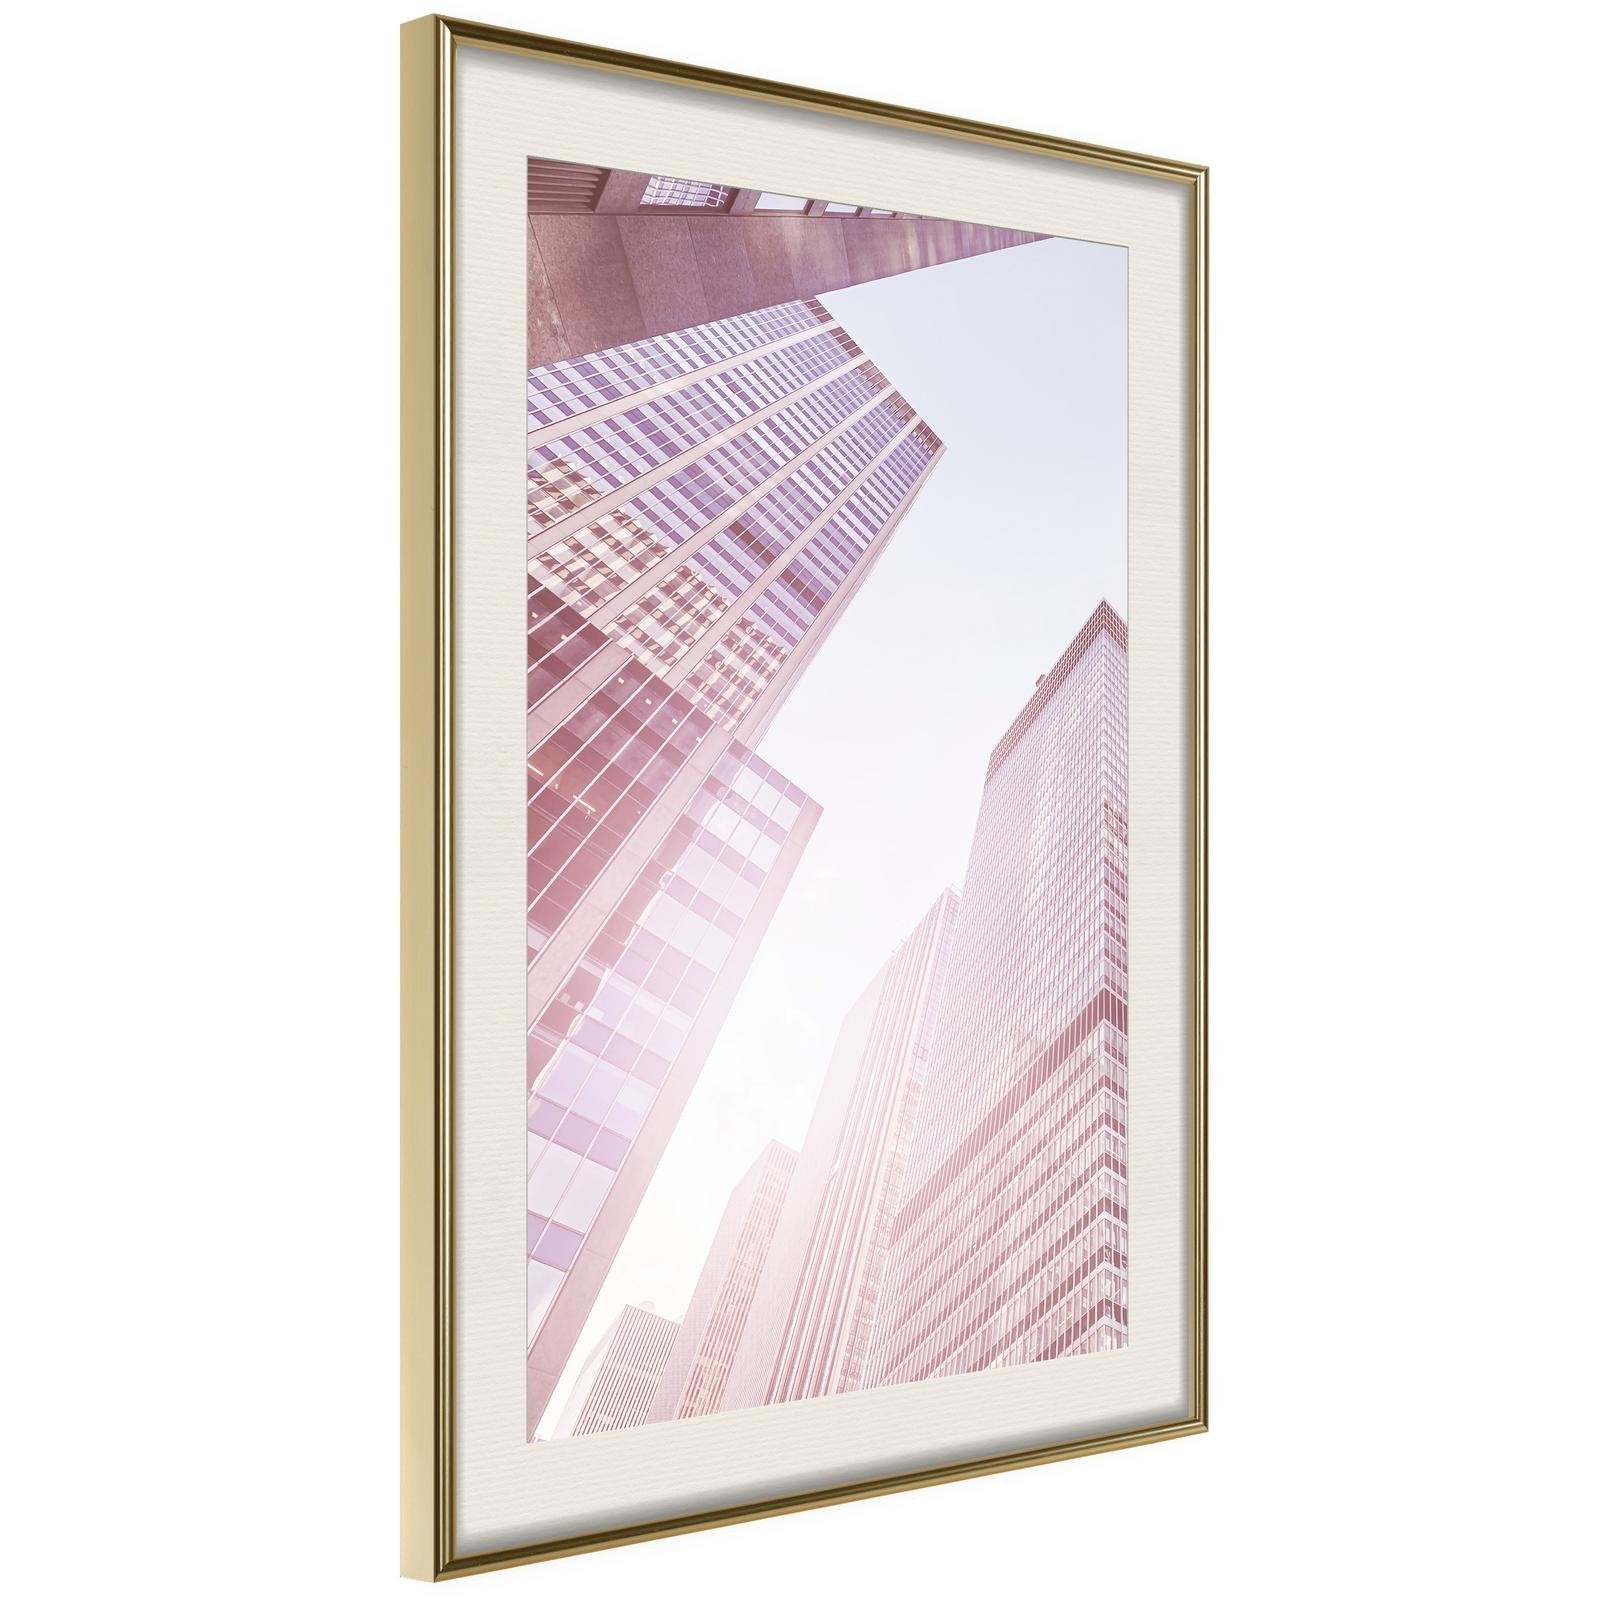 Inramad Poster / Tavla - Steel and Glass (Pink)-Poster Inramad-Artgeist-20x30-Guldram med passepartout-peaceofhome.se